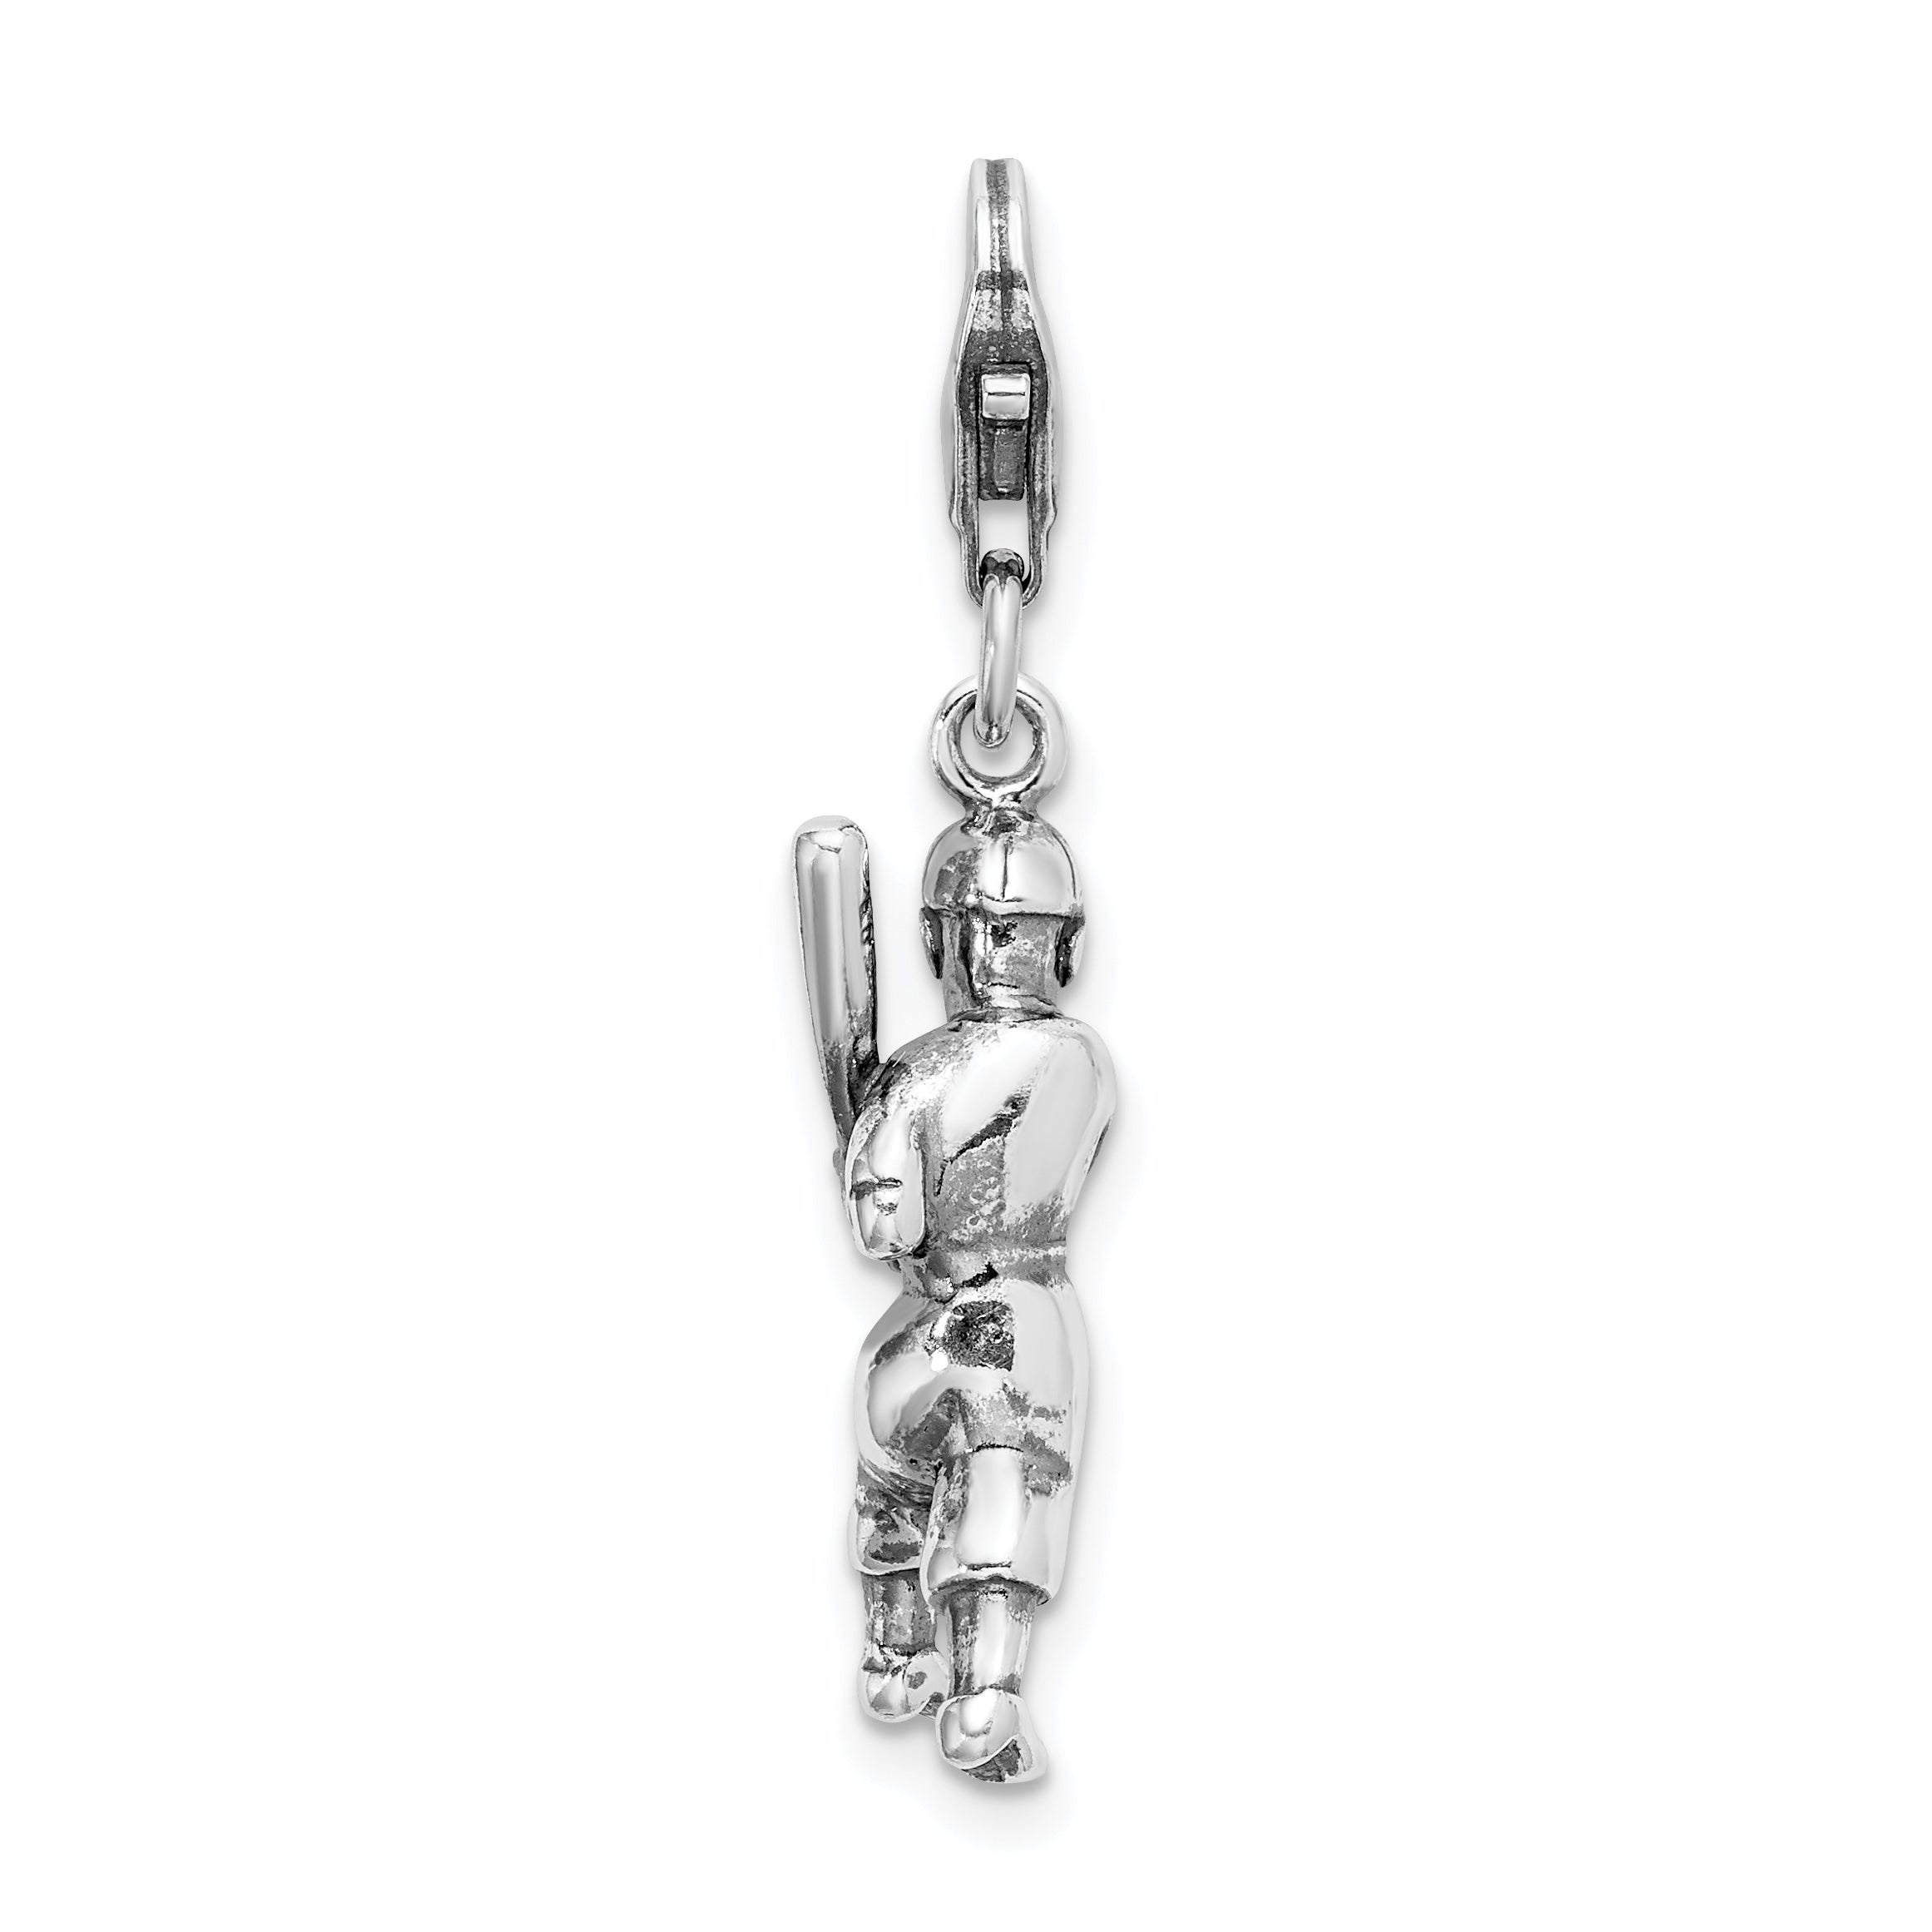 Amore La Vita Sterling Silver Rhodium-plated Polished 3-D Antiqued Baseball Player Charm with Fancy Lobster Clasp